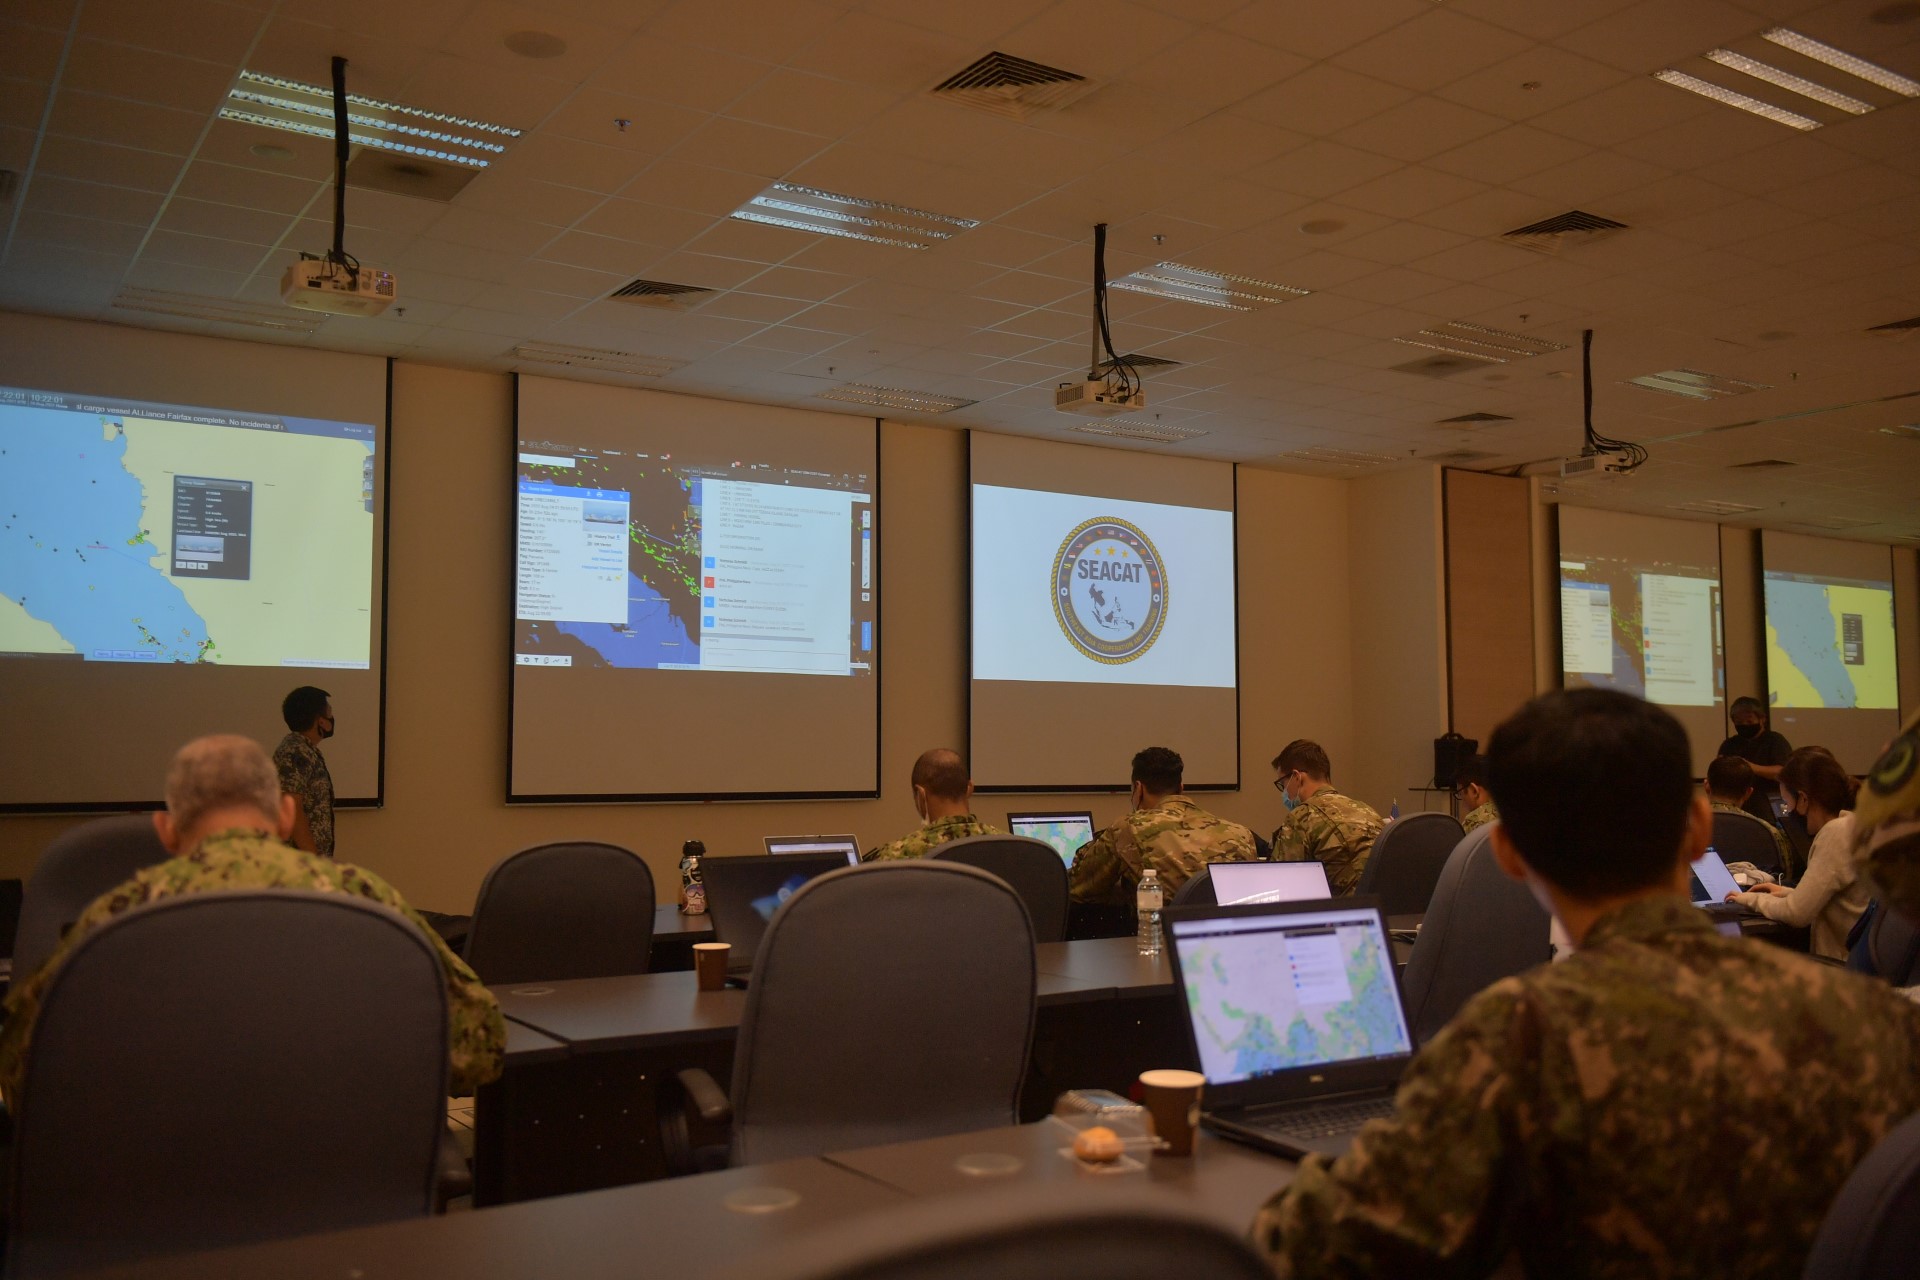 RSN personnel and International Liaison Officers planned out the operational response from the command post setup at  the Changi Command and Control Centre (CC2C) in RSS Singapura – Changi Naval Base.